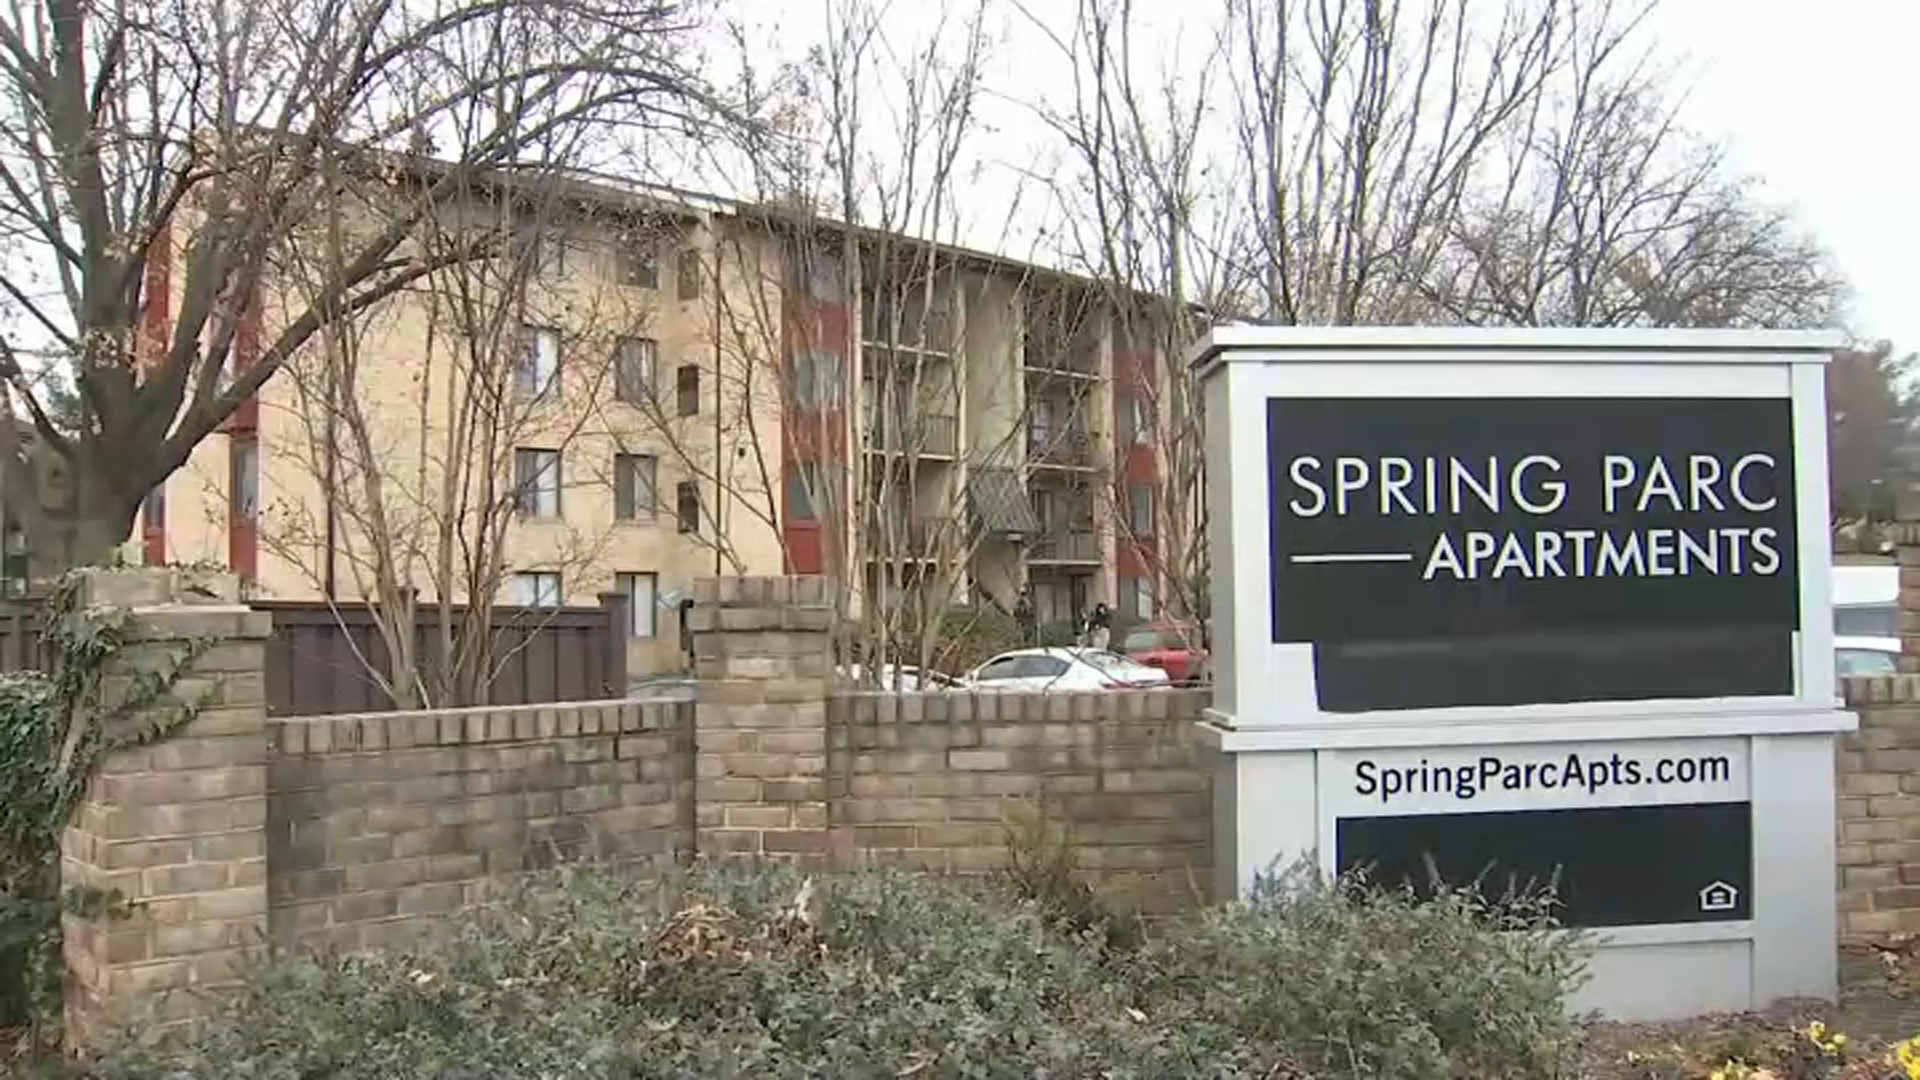 Man Shot, Killed in Silver Spring Apartment